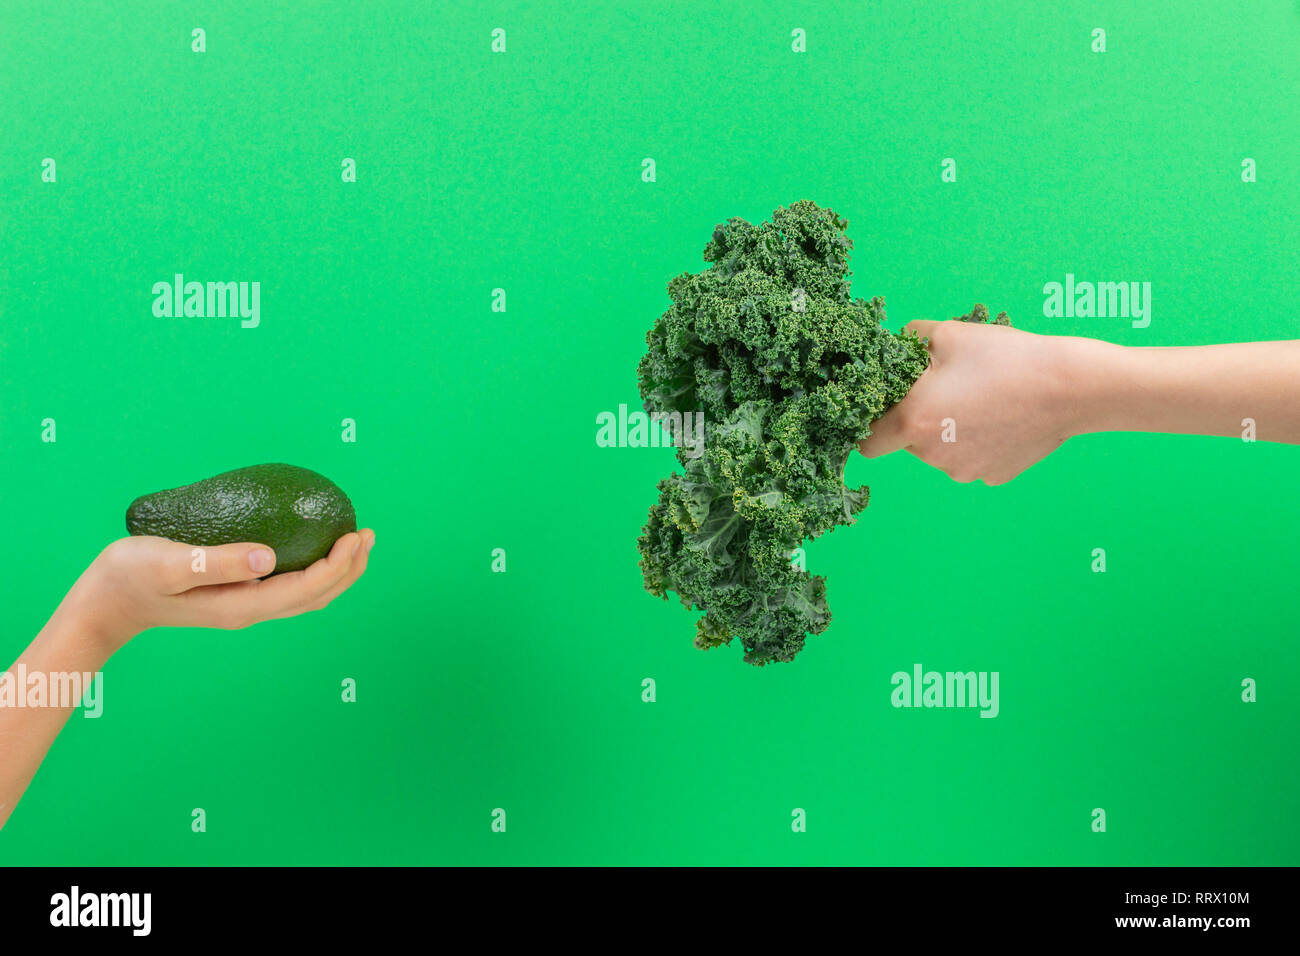 Healthy vegetables for kids. Kid hand with bunch of kale leaves and kid hand holding avocado over green background Stock Photo